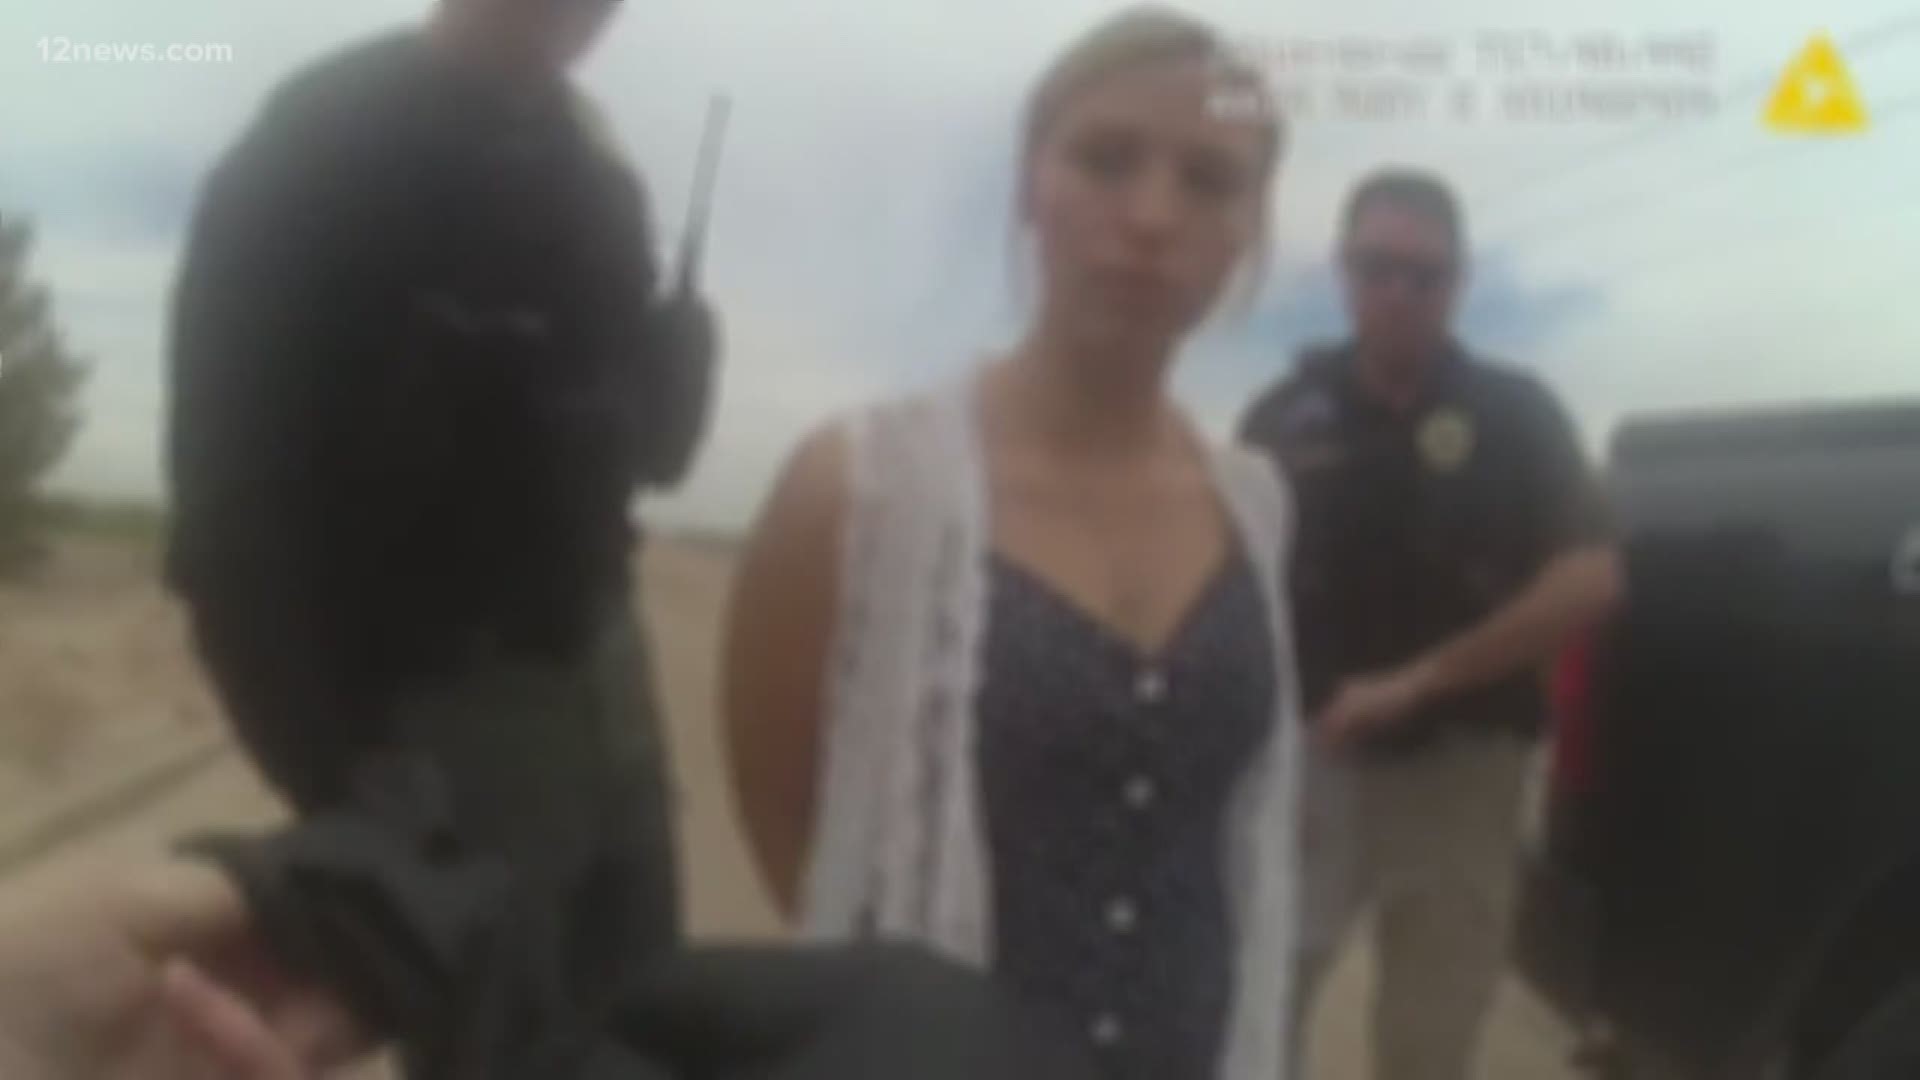 Body camera video shows former sixth-grade teacher Brittany Zamora getting arrested after her student told his parents about sexual abuse.